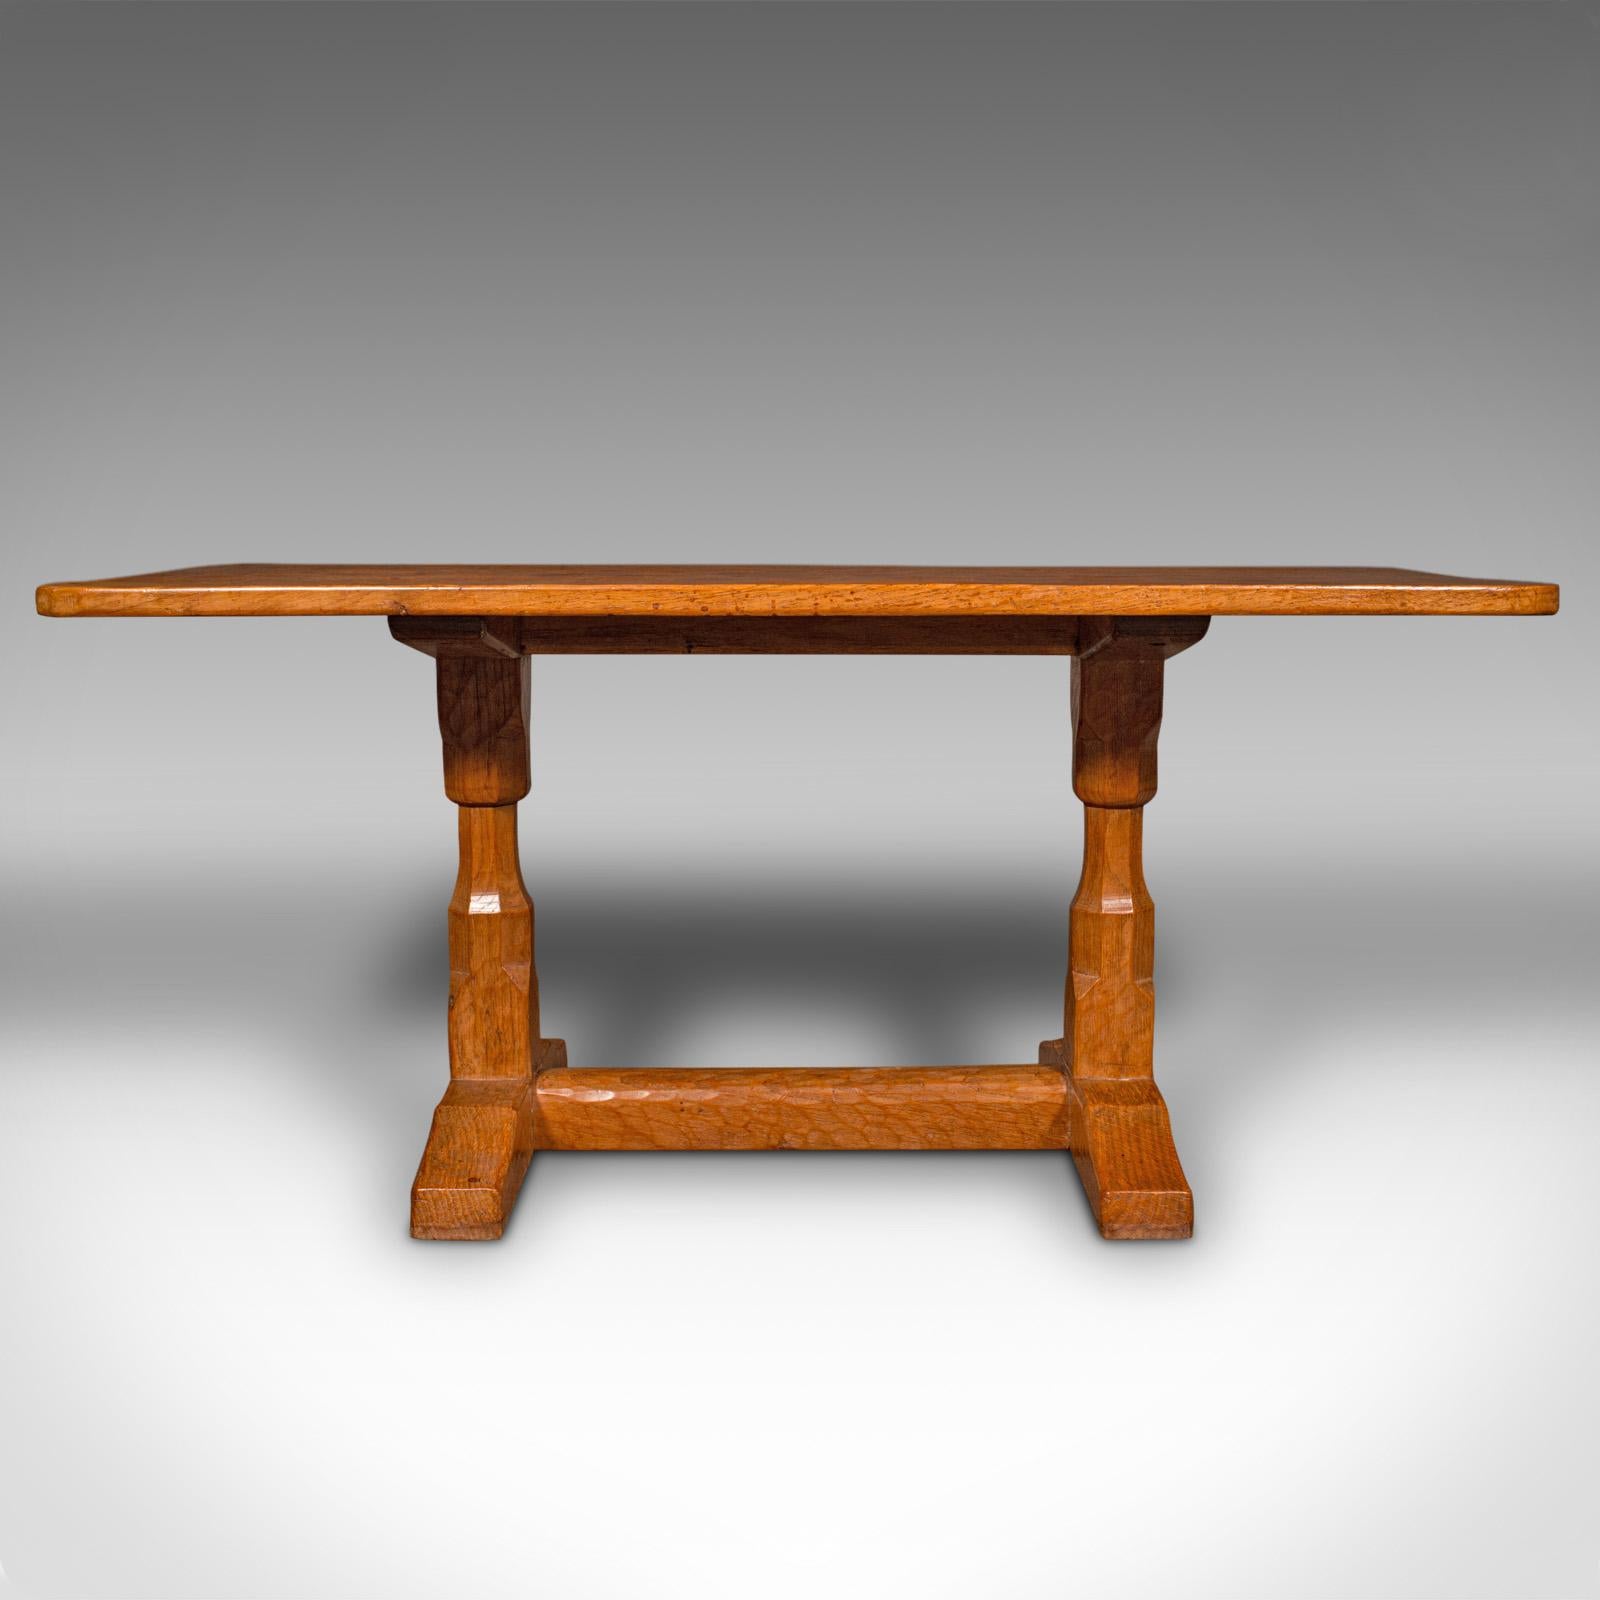 Vintage Coffee Table, English Oak, Cotswold School, After Mouseman, 20th Century In Good Condition For Sale In Hele, Devon, GB